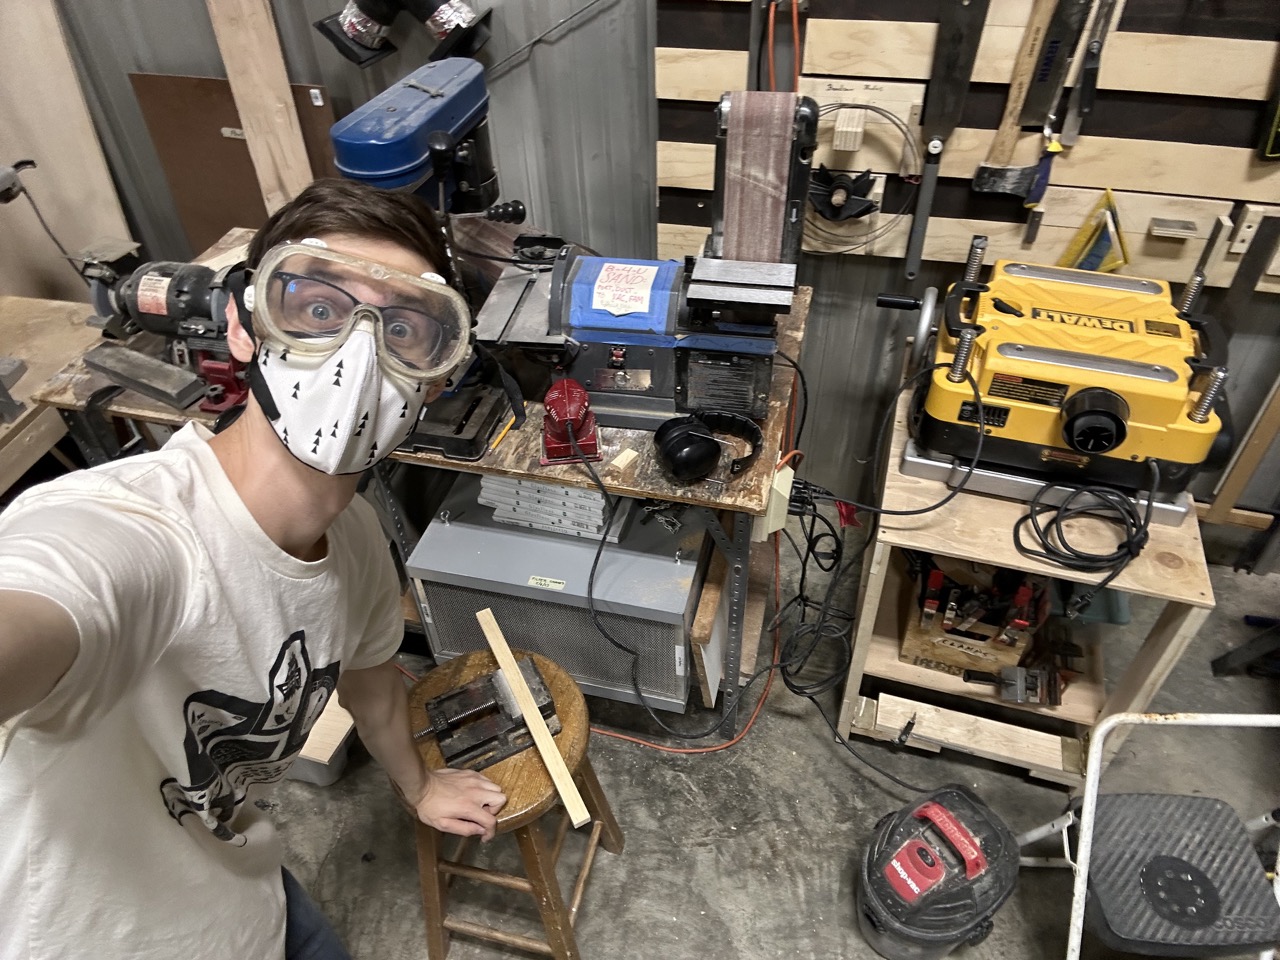 The first photo I took in the shop! Here I'm sanding one of the edges of the tray. The mask and goggles really help keep the sawdust out of my face.